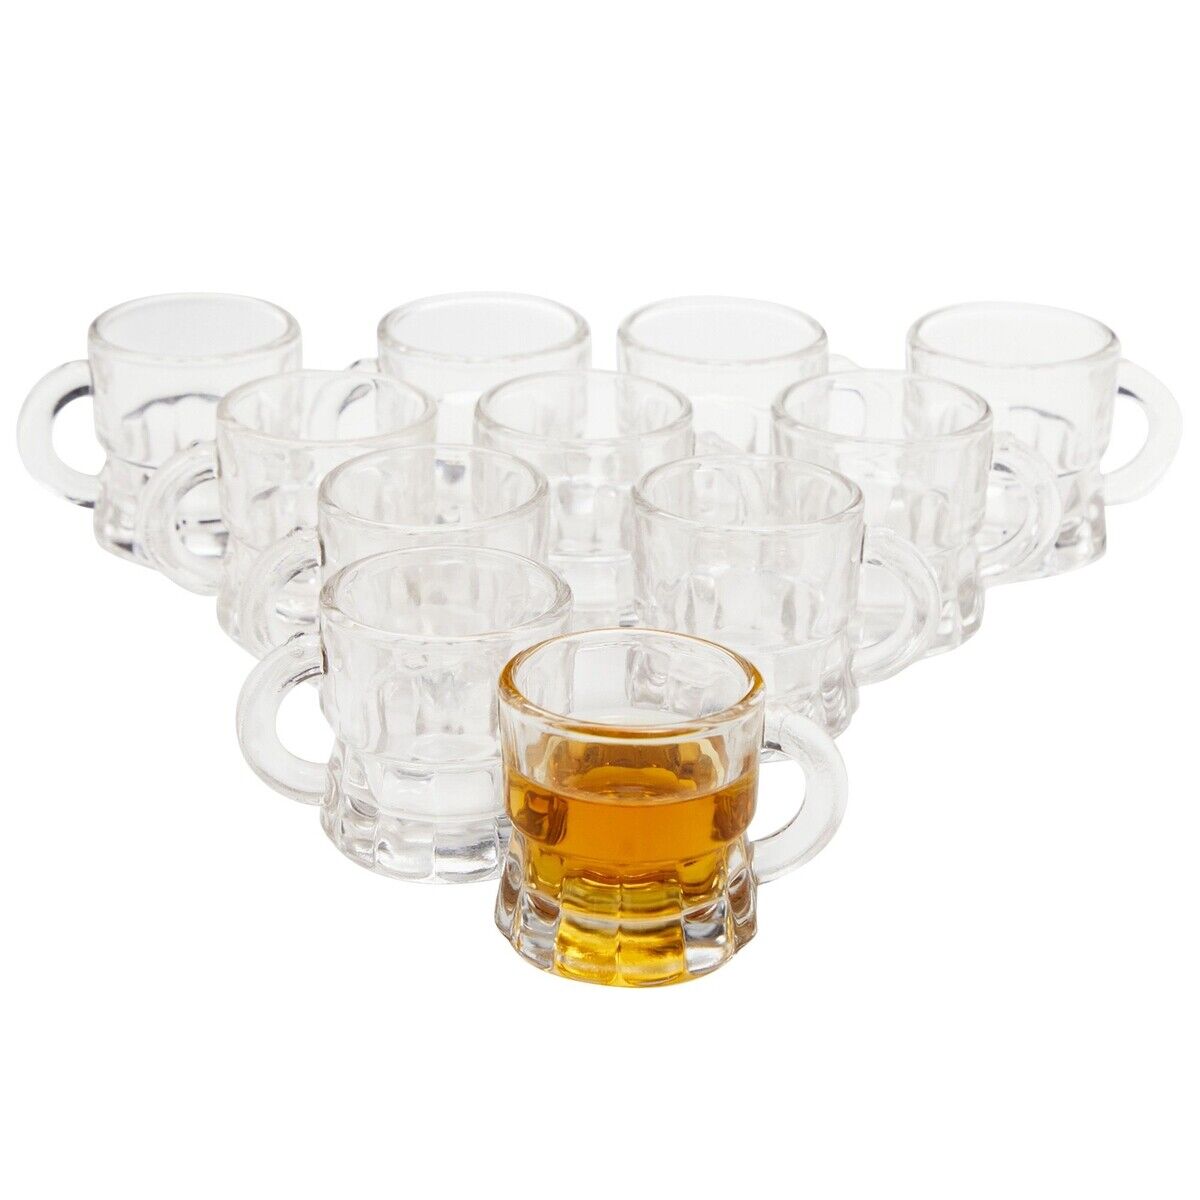 Mini Beer Mug Shot Glasses with Handles for Party (1.57 x 1.9 In, 12 Pack)